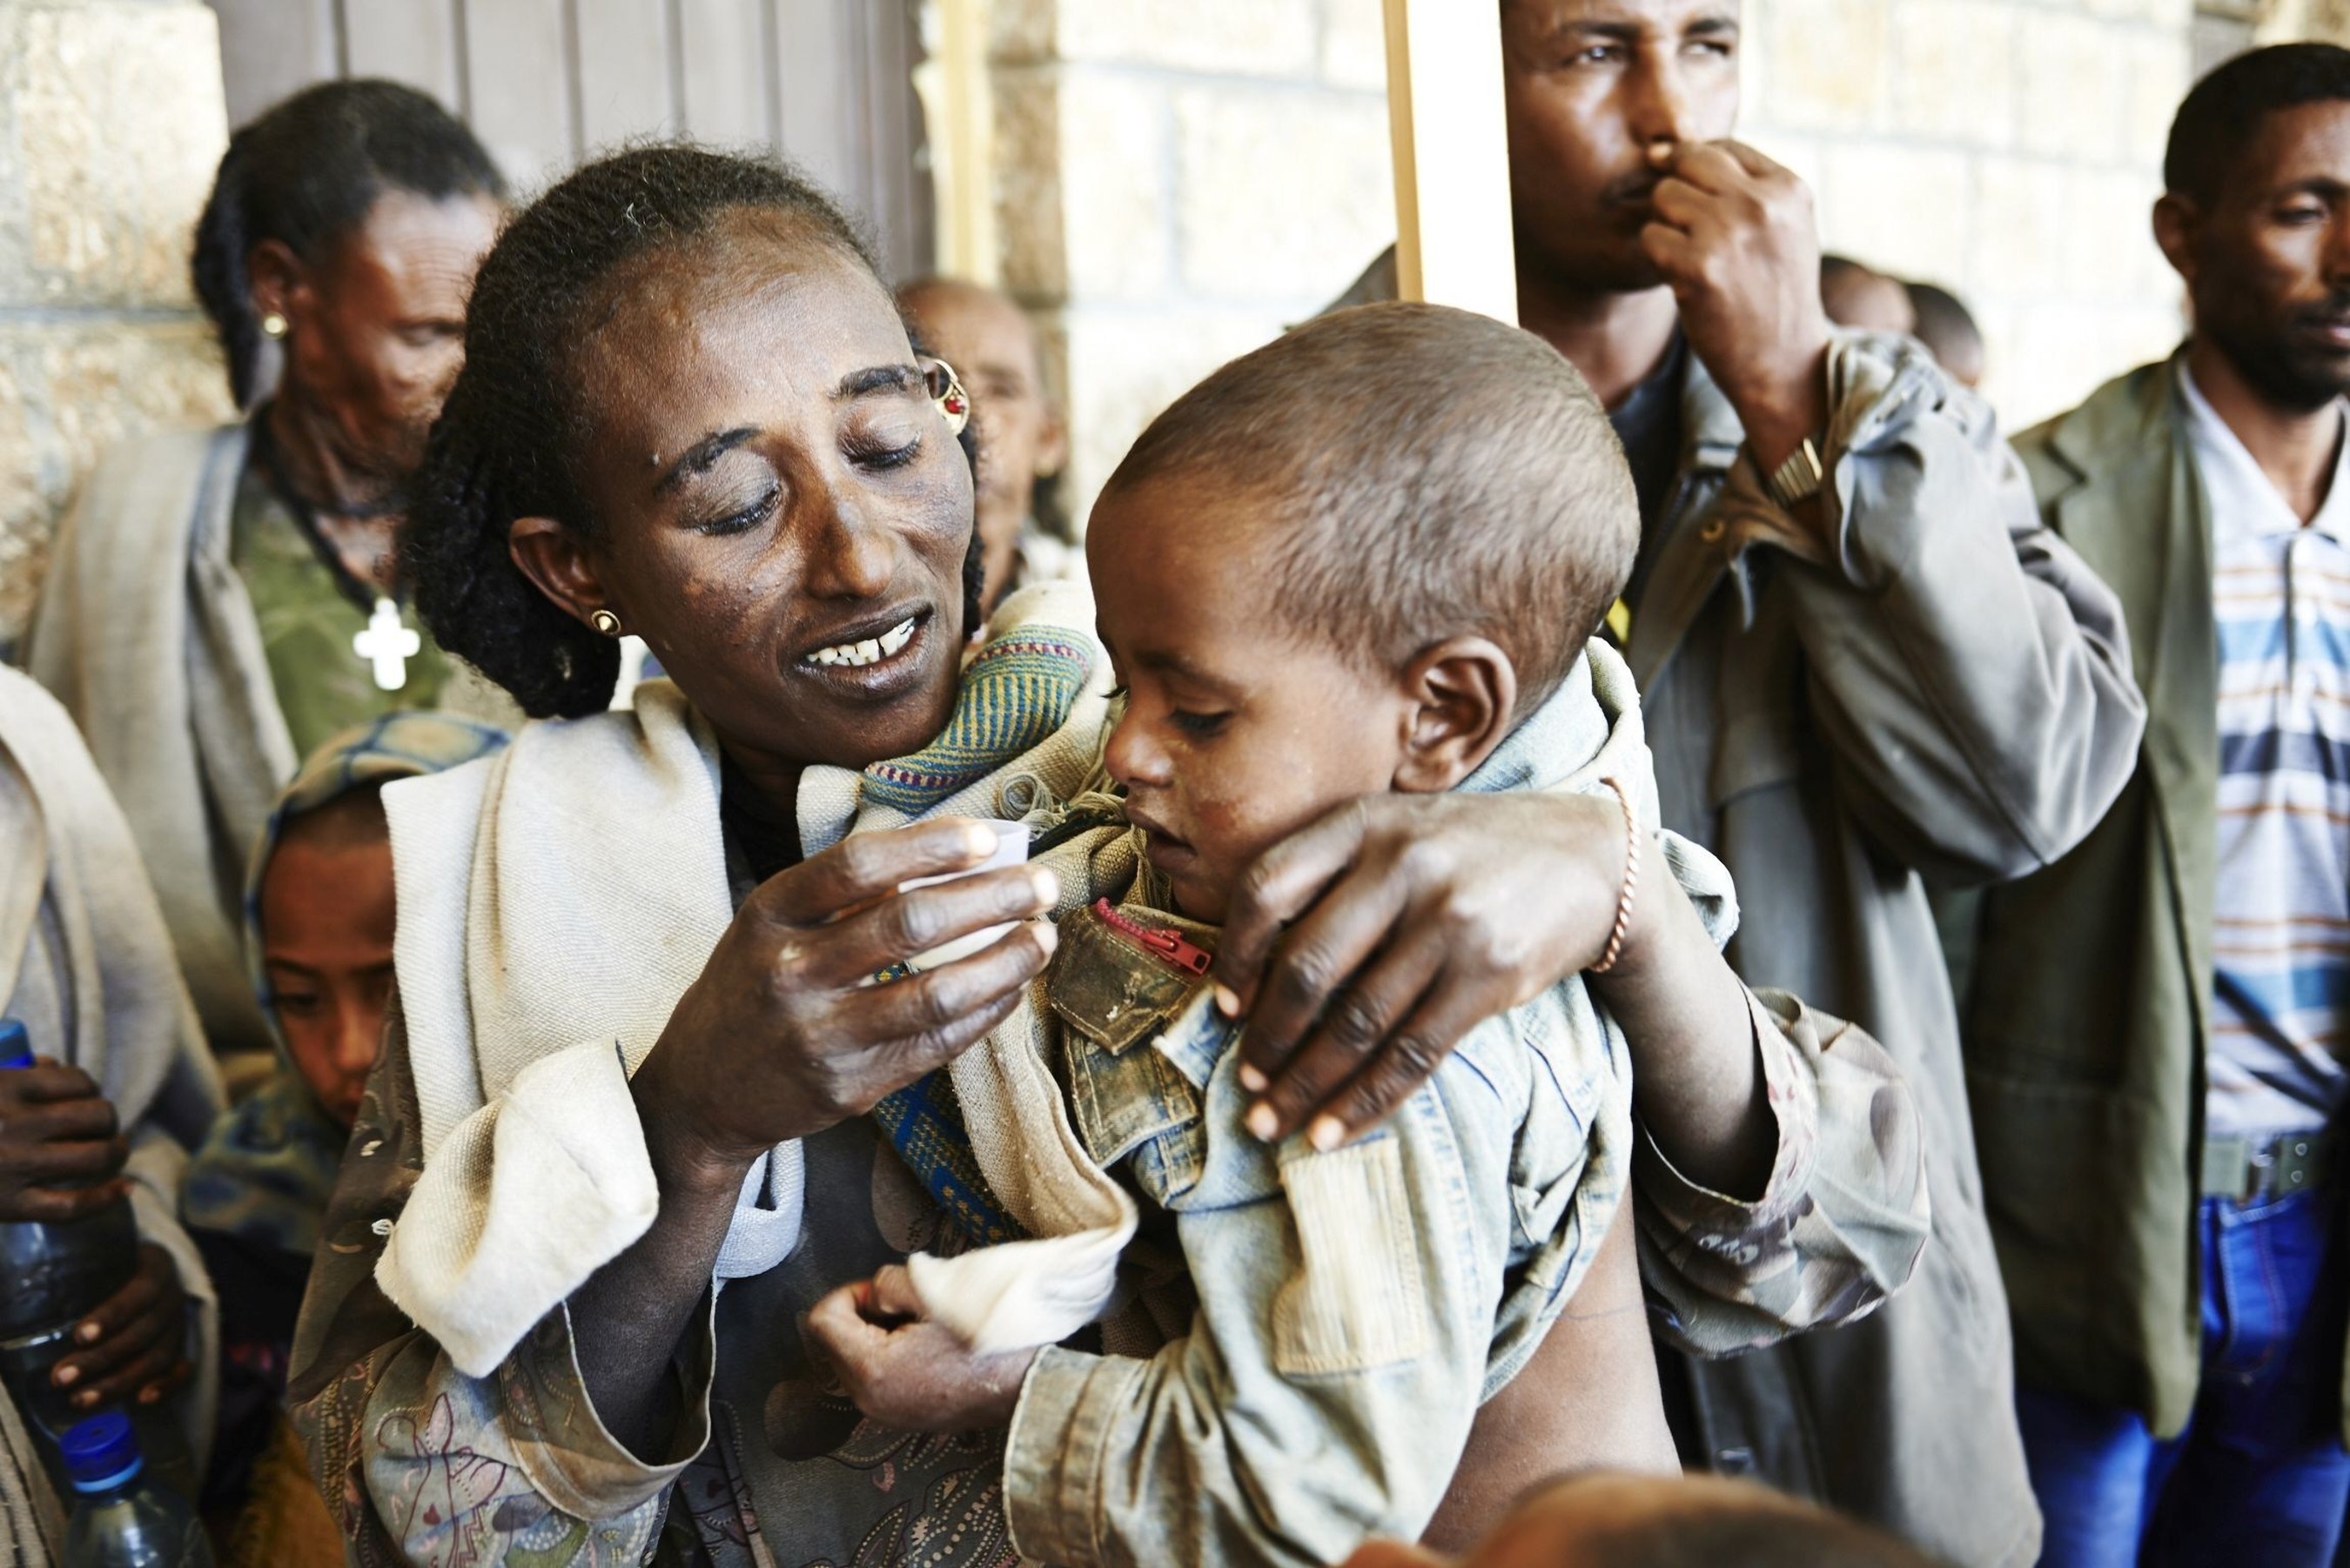 Children receive free antibiotics at a health station in Gamera/northern Ethiopia against trachoma infections. The distribution of antibiotics is part of the S.A.F.E. strategy LIGHT FOR THE WORLD is implementing to combat trachoma. Credit: Aleksandra Pawloff/LIGHT FOR THE WORLD (PRNewsFoto/LIGHT FOR THE WORLD)